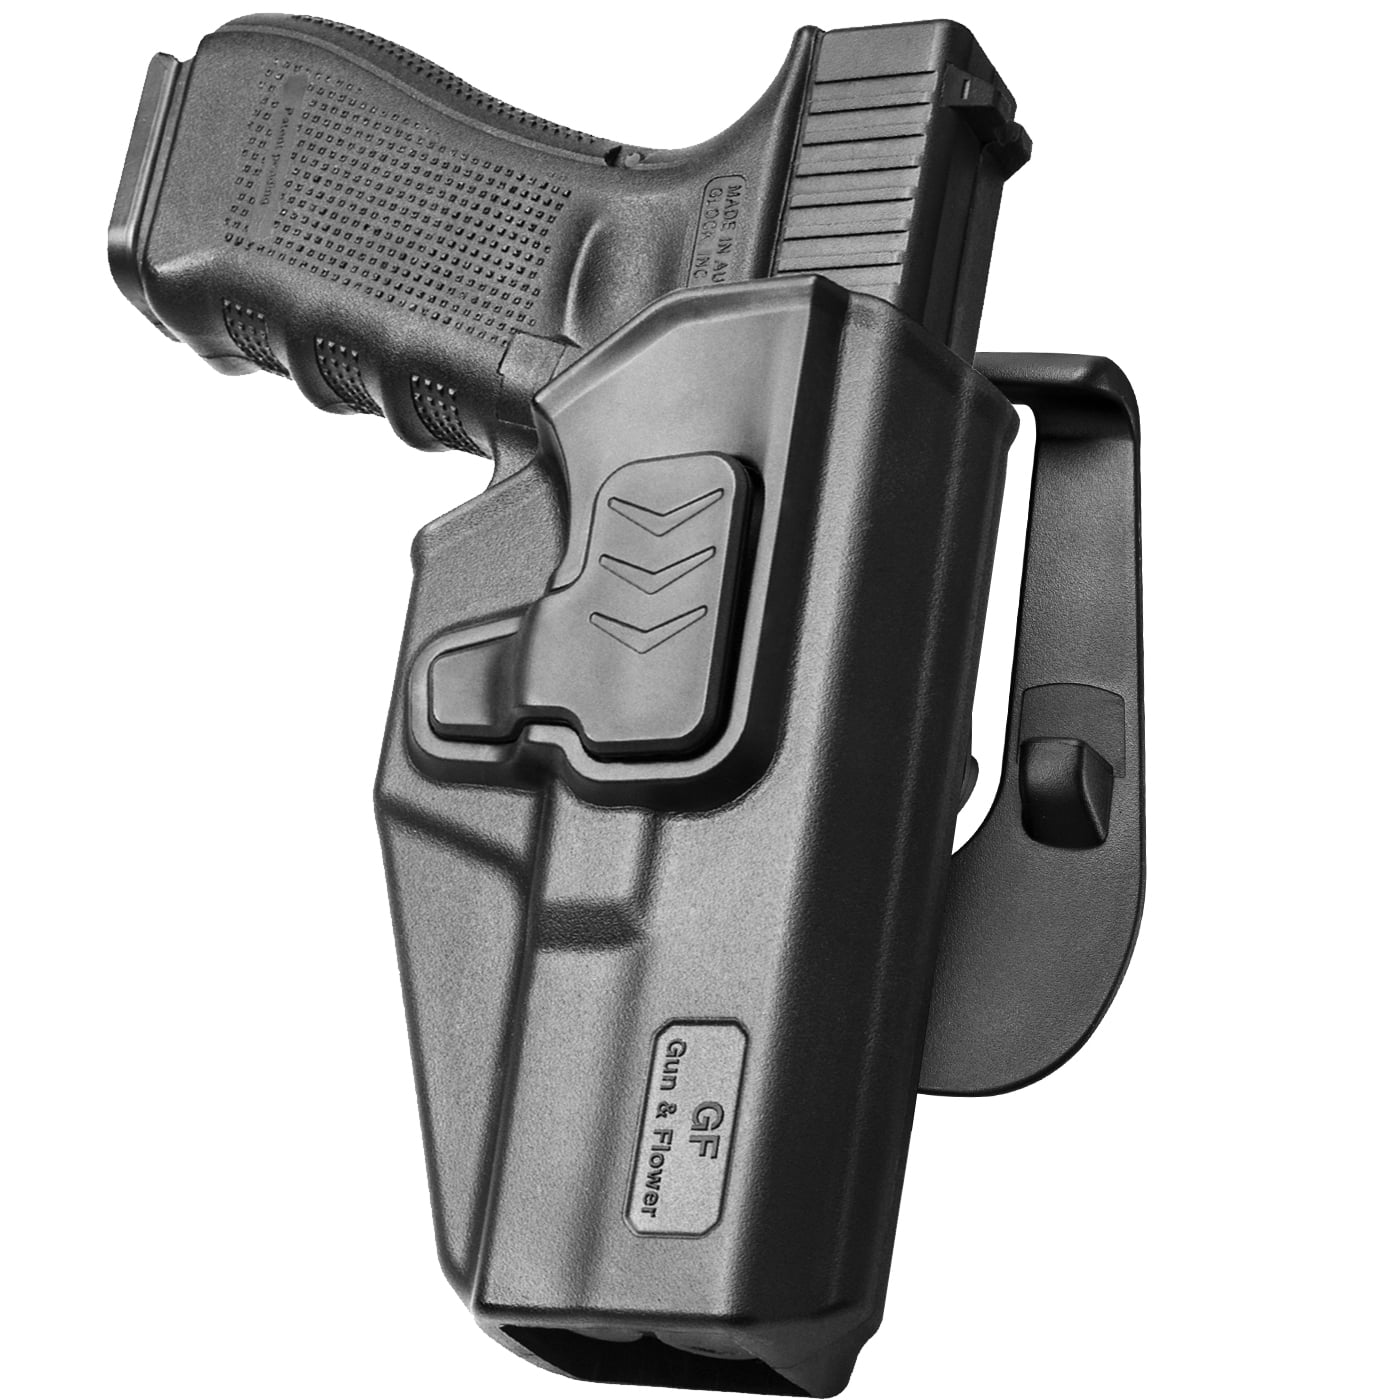 Compatible with Glock 17 Holster, Polymer OWB Holster Fits G17/19/31/32 ...